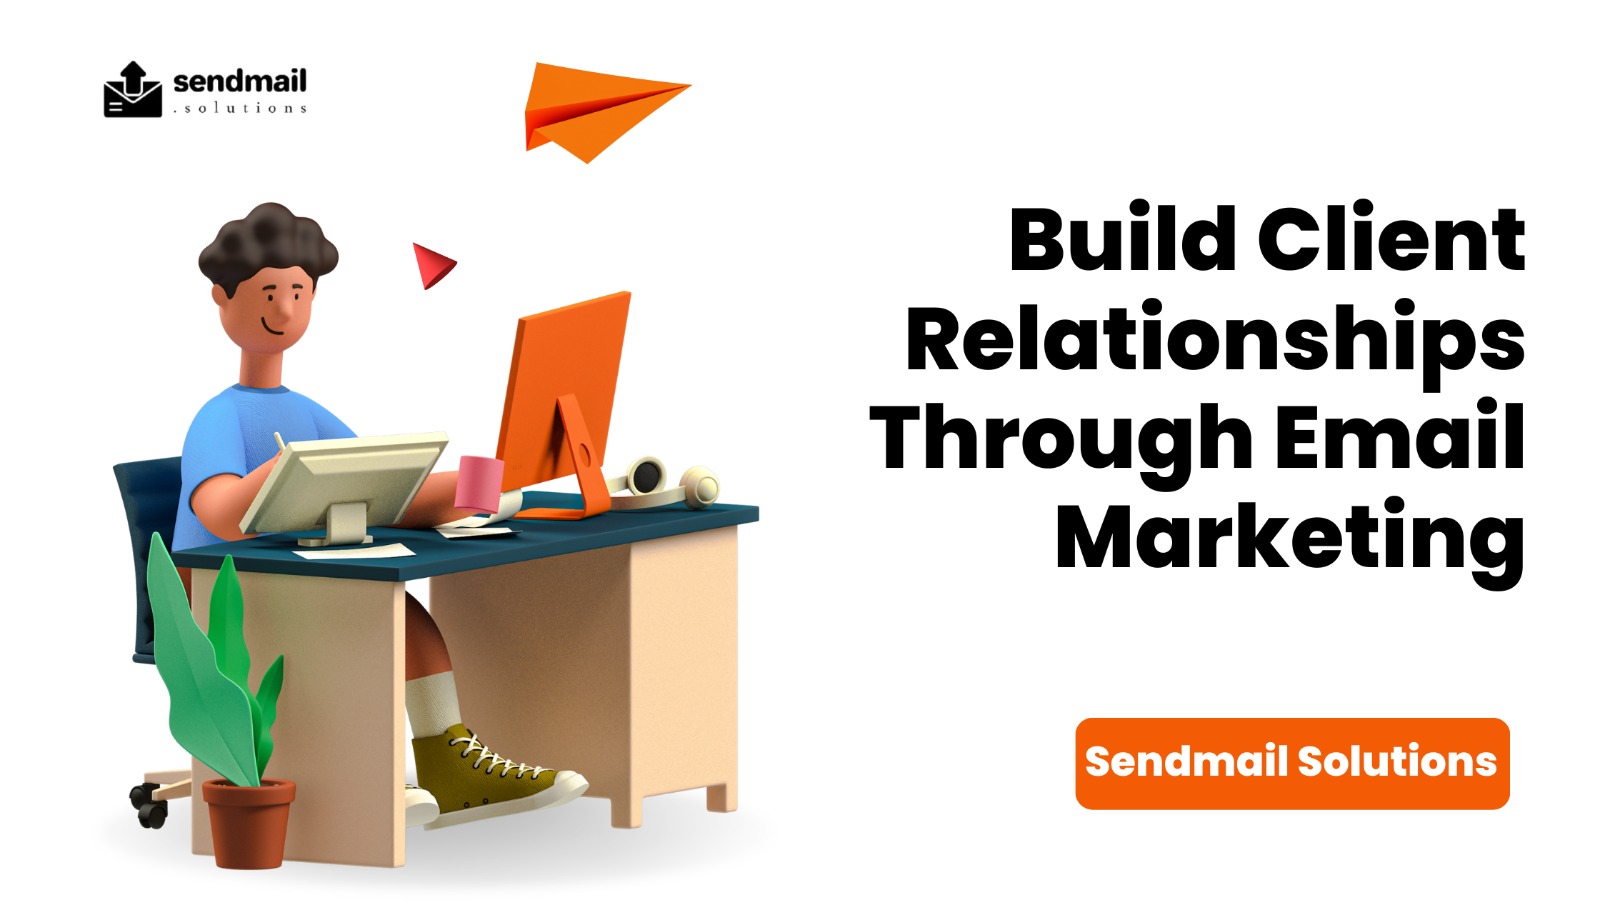 Build Client Relationships Through Email Marketing